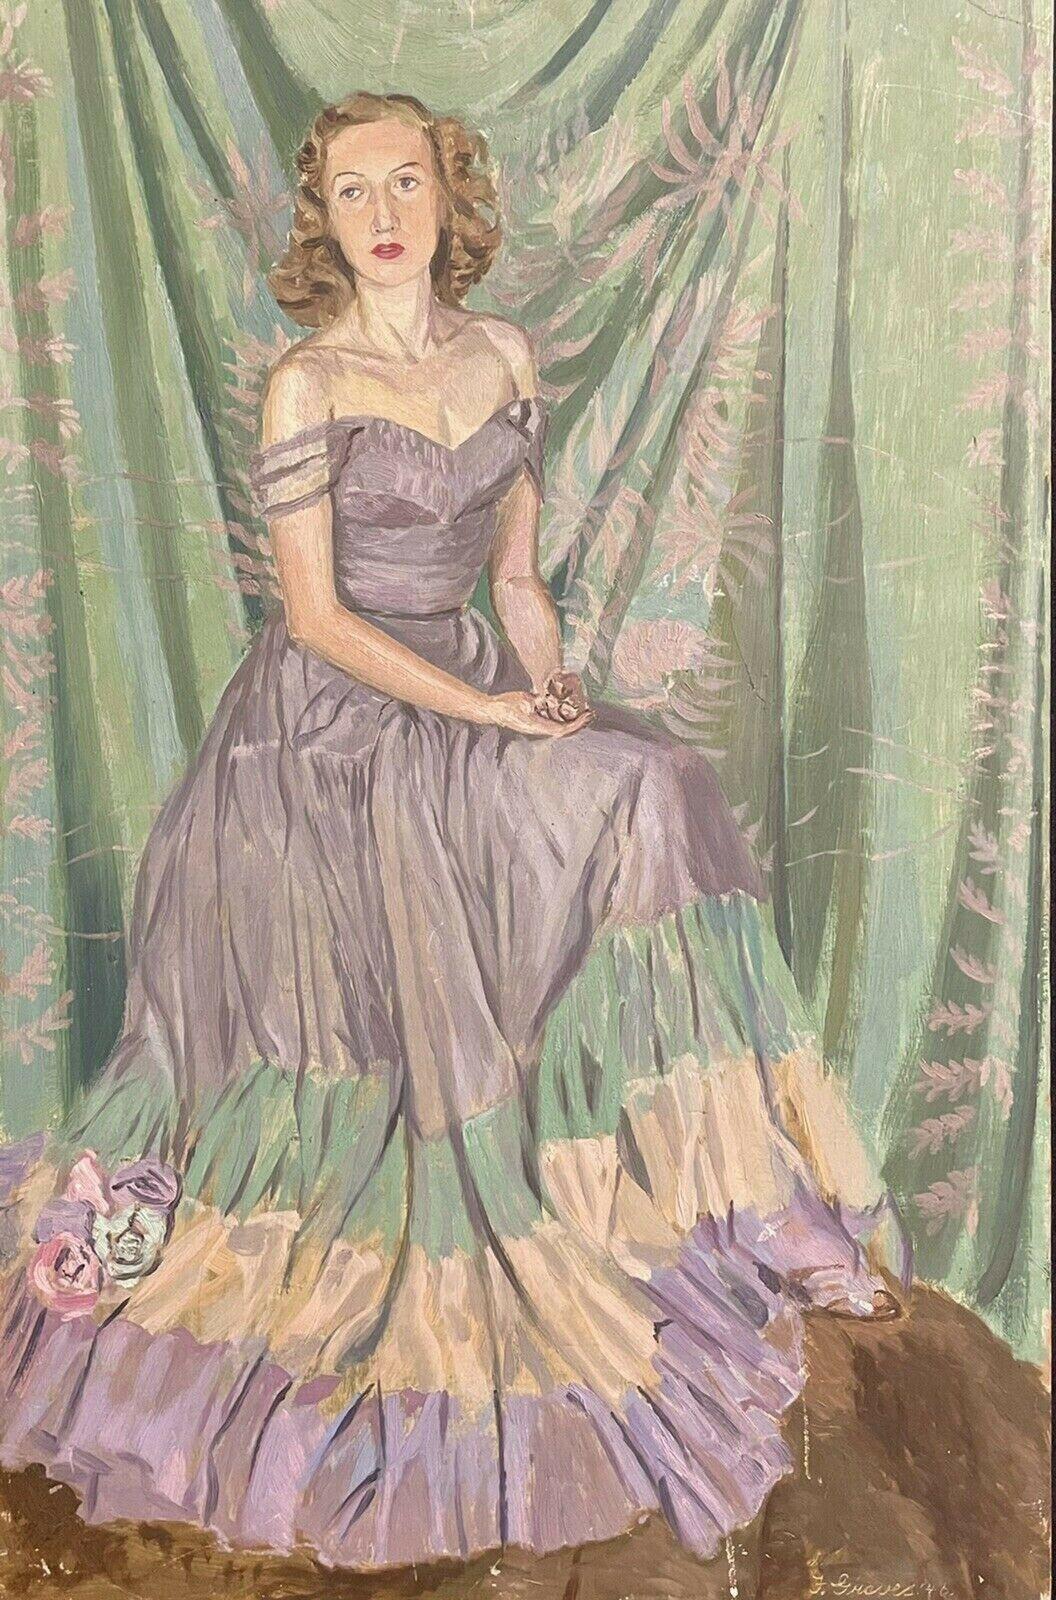 Frank Graves Interior Painting - 1940's ENGLISH SIGNED OIL - PORTRAIT OF A LADY IN ELEGANT DRESS - GREENS & PINKS